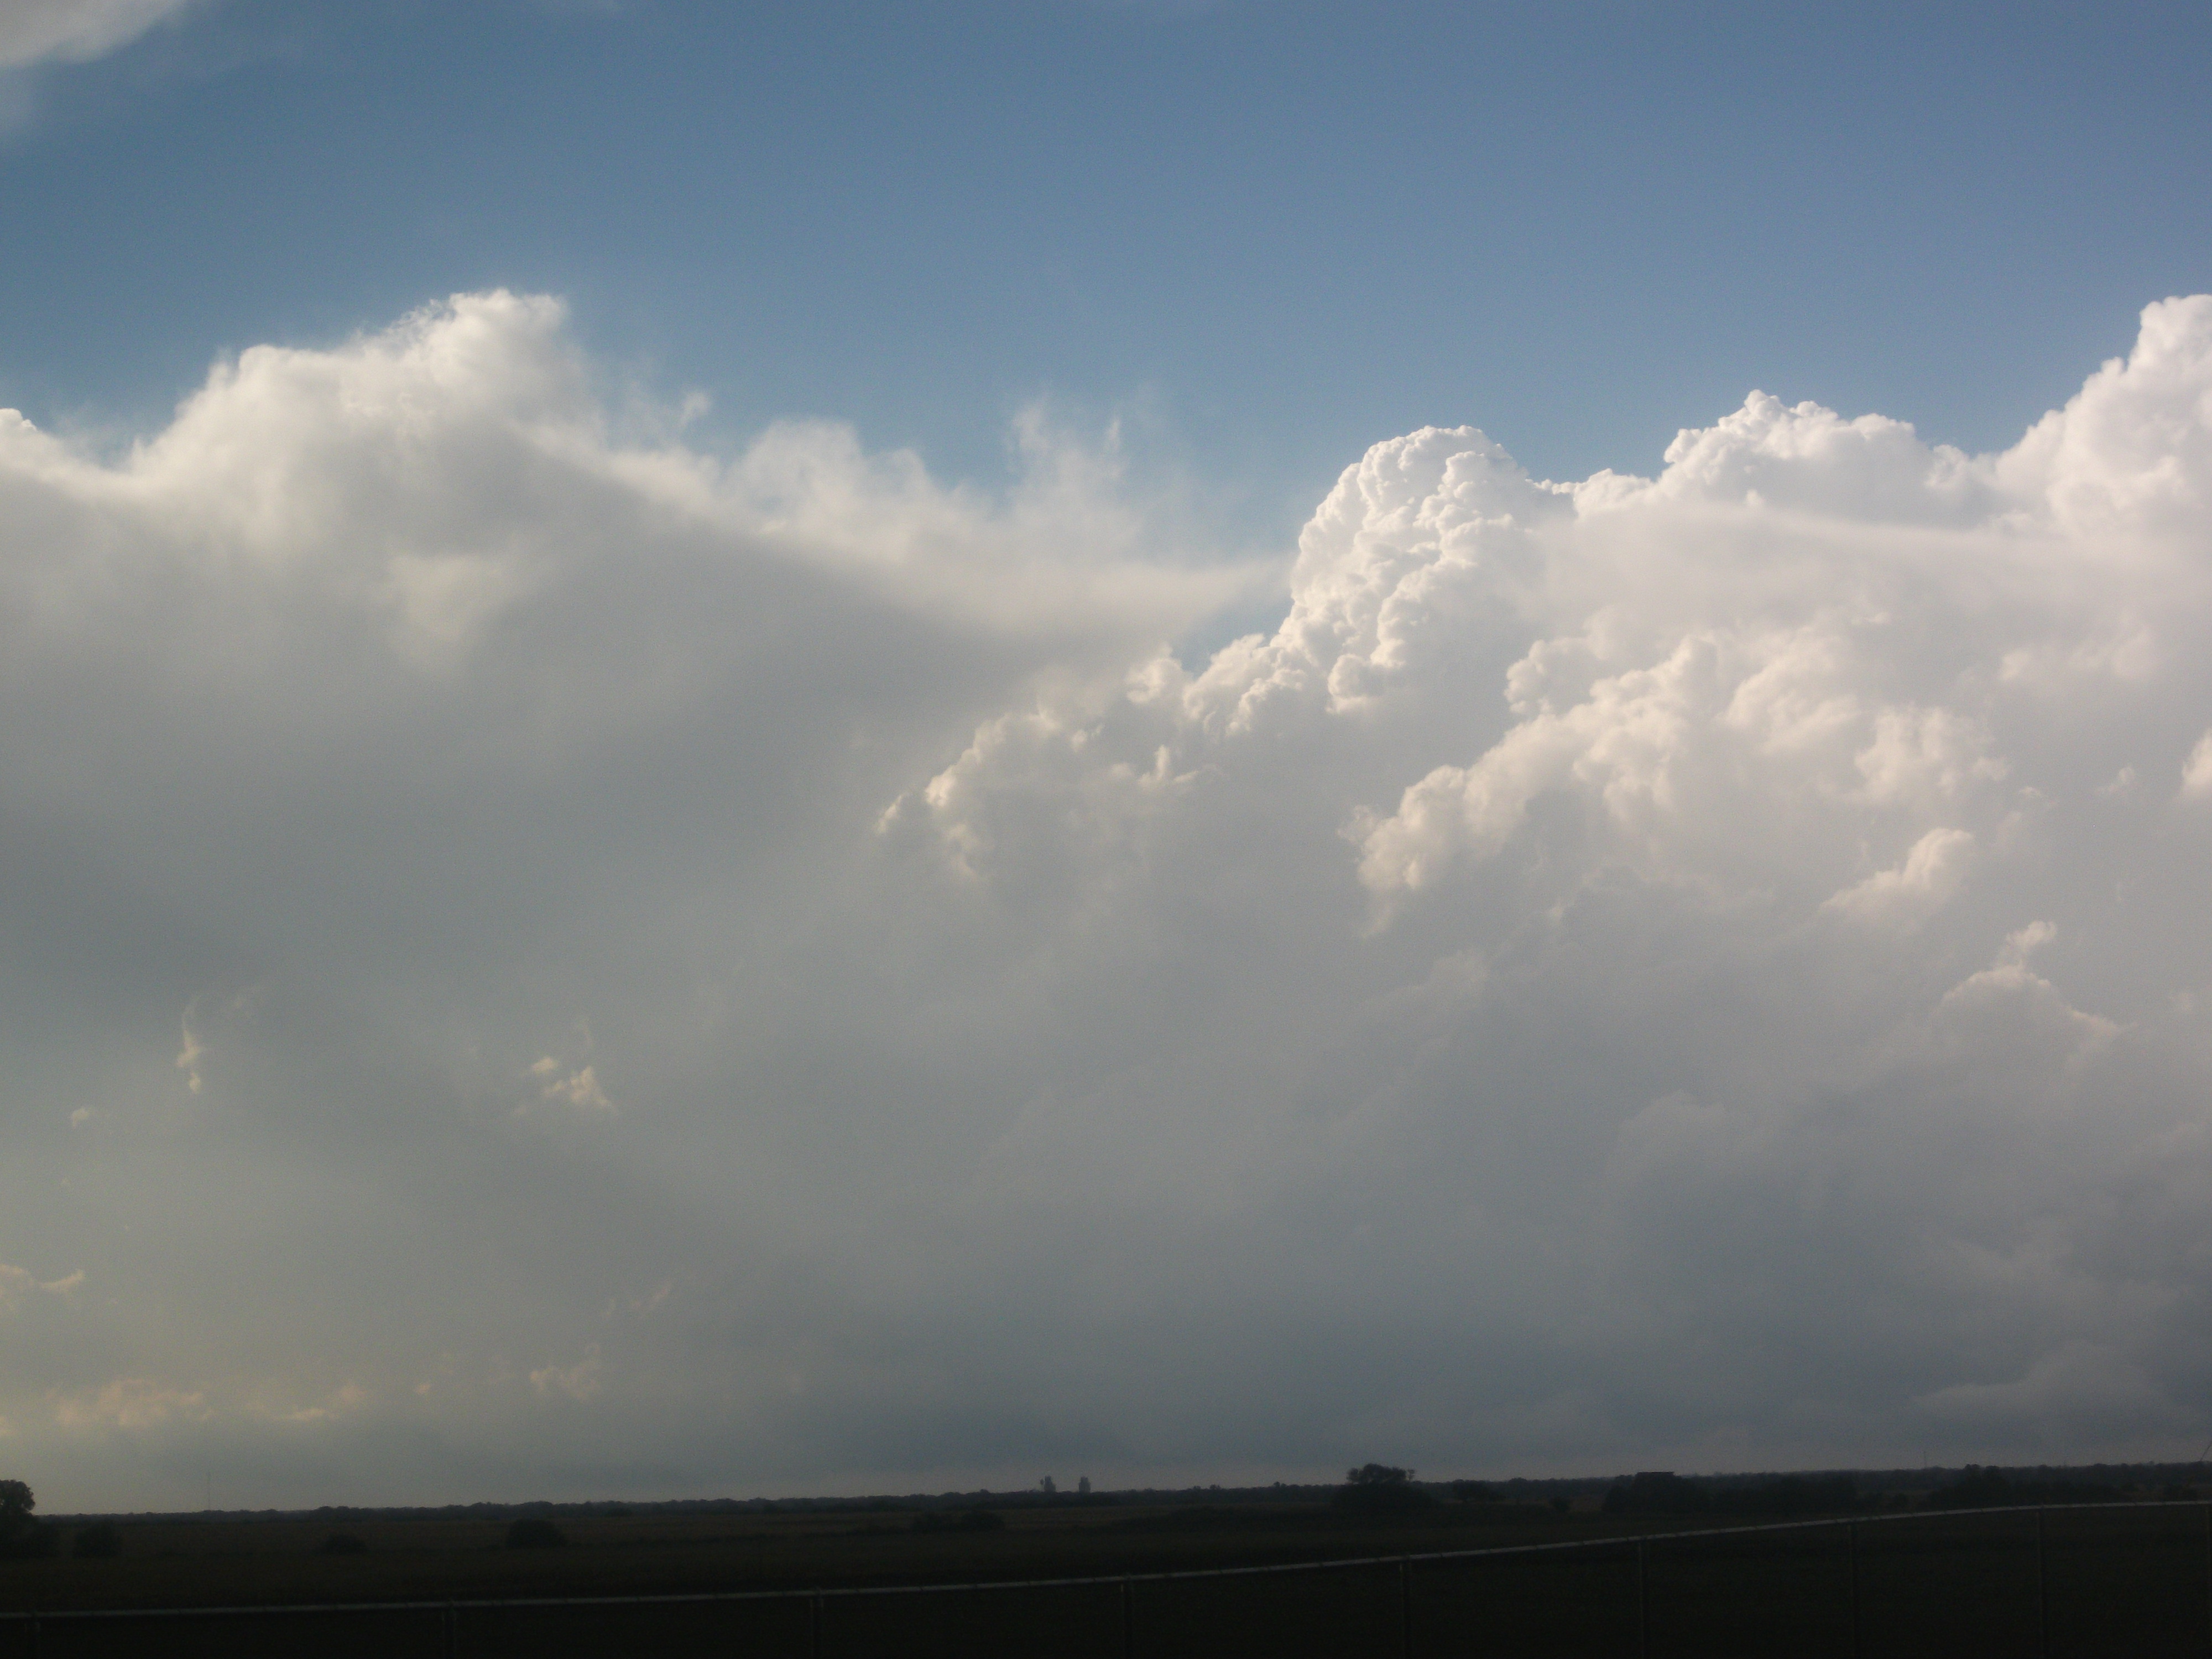 Deep convective clouds, high and thick, challenge climate models.